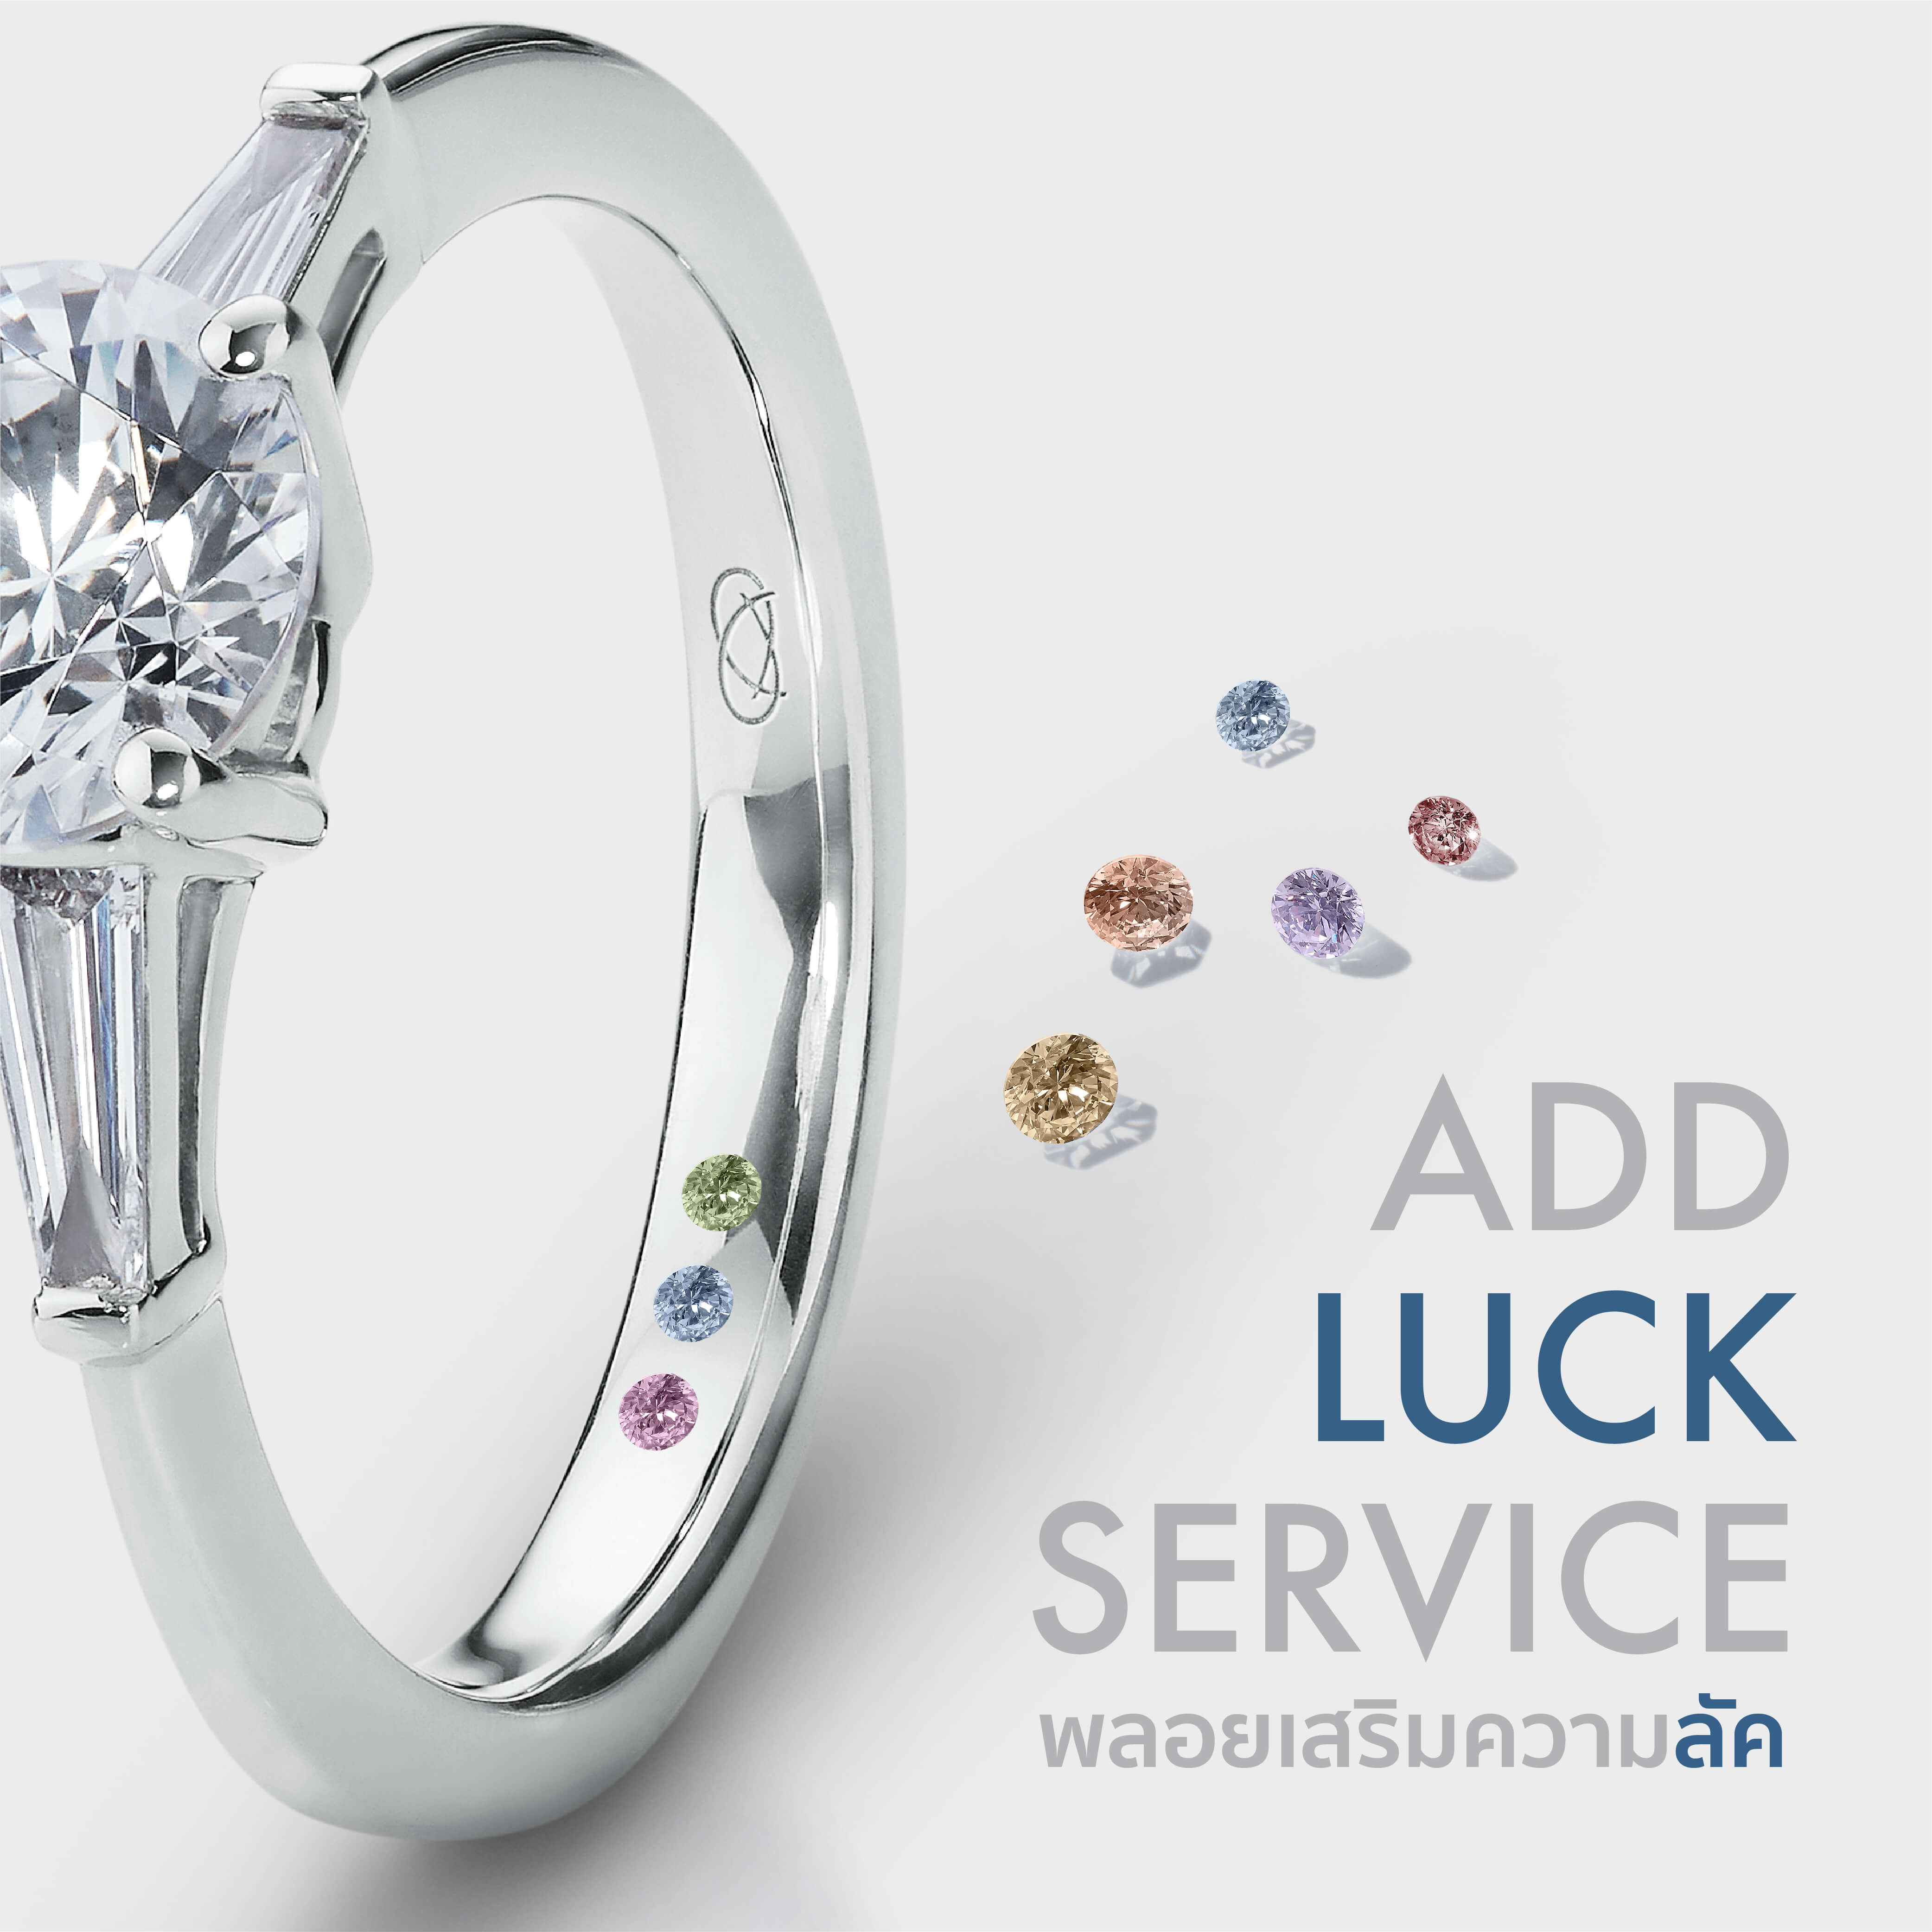 Add Luck Service : Special Service from Ananta